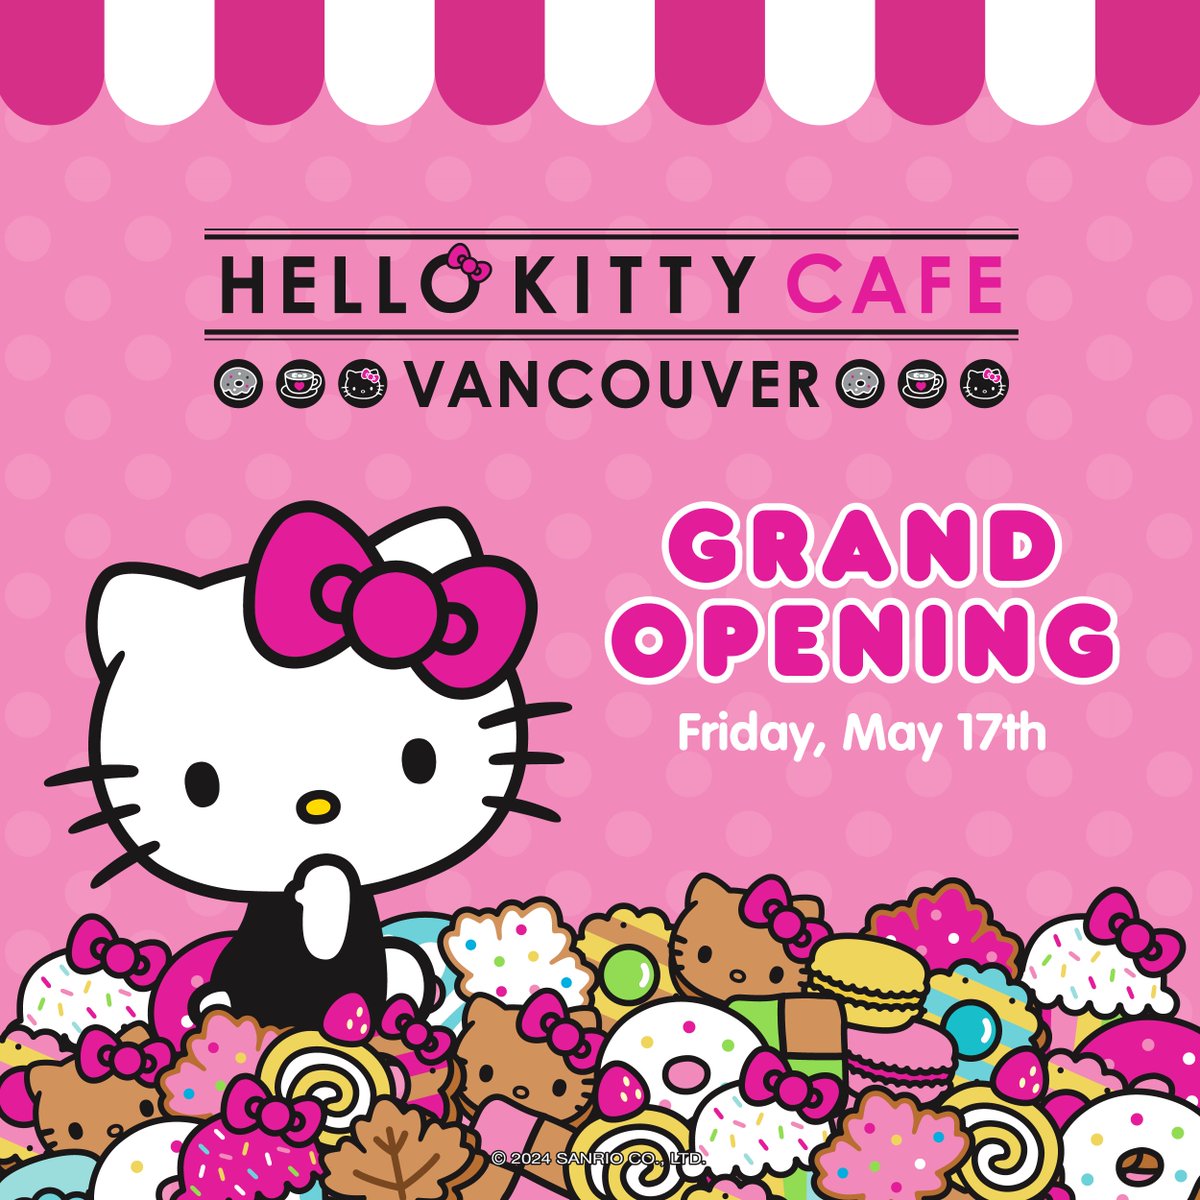 Hello Vancouver! 🇨🇦 🎀 Join us for the Grand Opening on Friday, May 17th at 12pm! ⁠ 

💖 Meet and greet with Hello Kitty⁠
💖 First 50 guests will receive a Hello Kitty goodie bag 
💖 Enjoy Hello Kitty-themed treats and beverages

📍1274 Robson St, Vancouver, BC V6E 3Z6